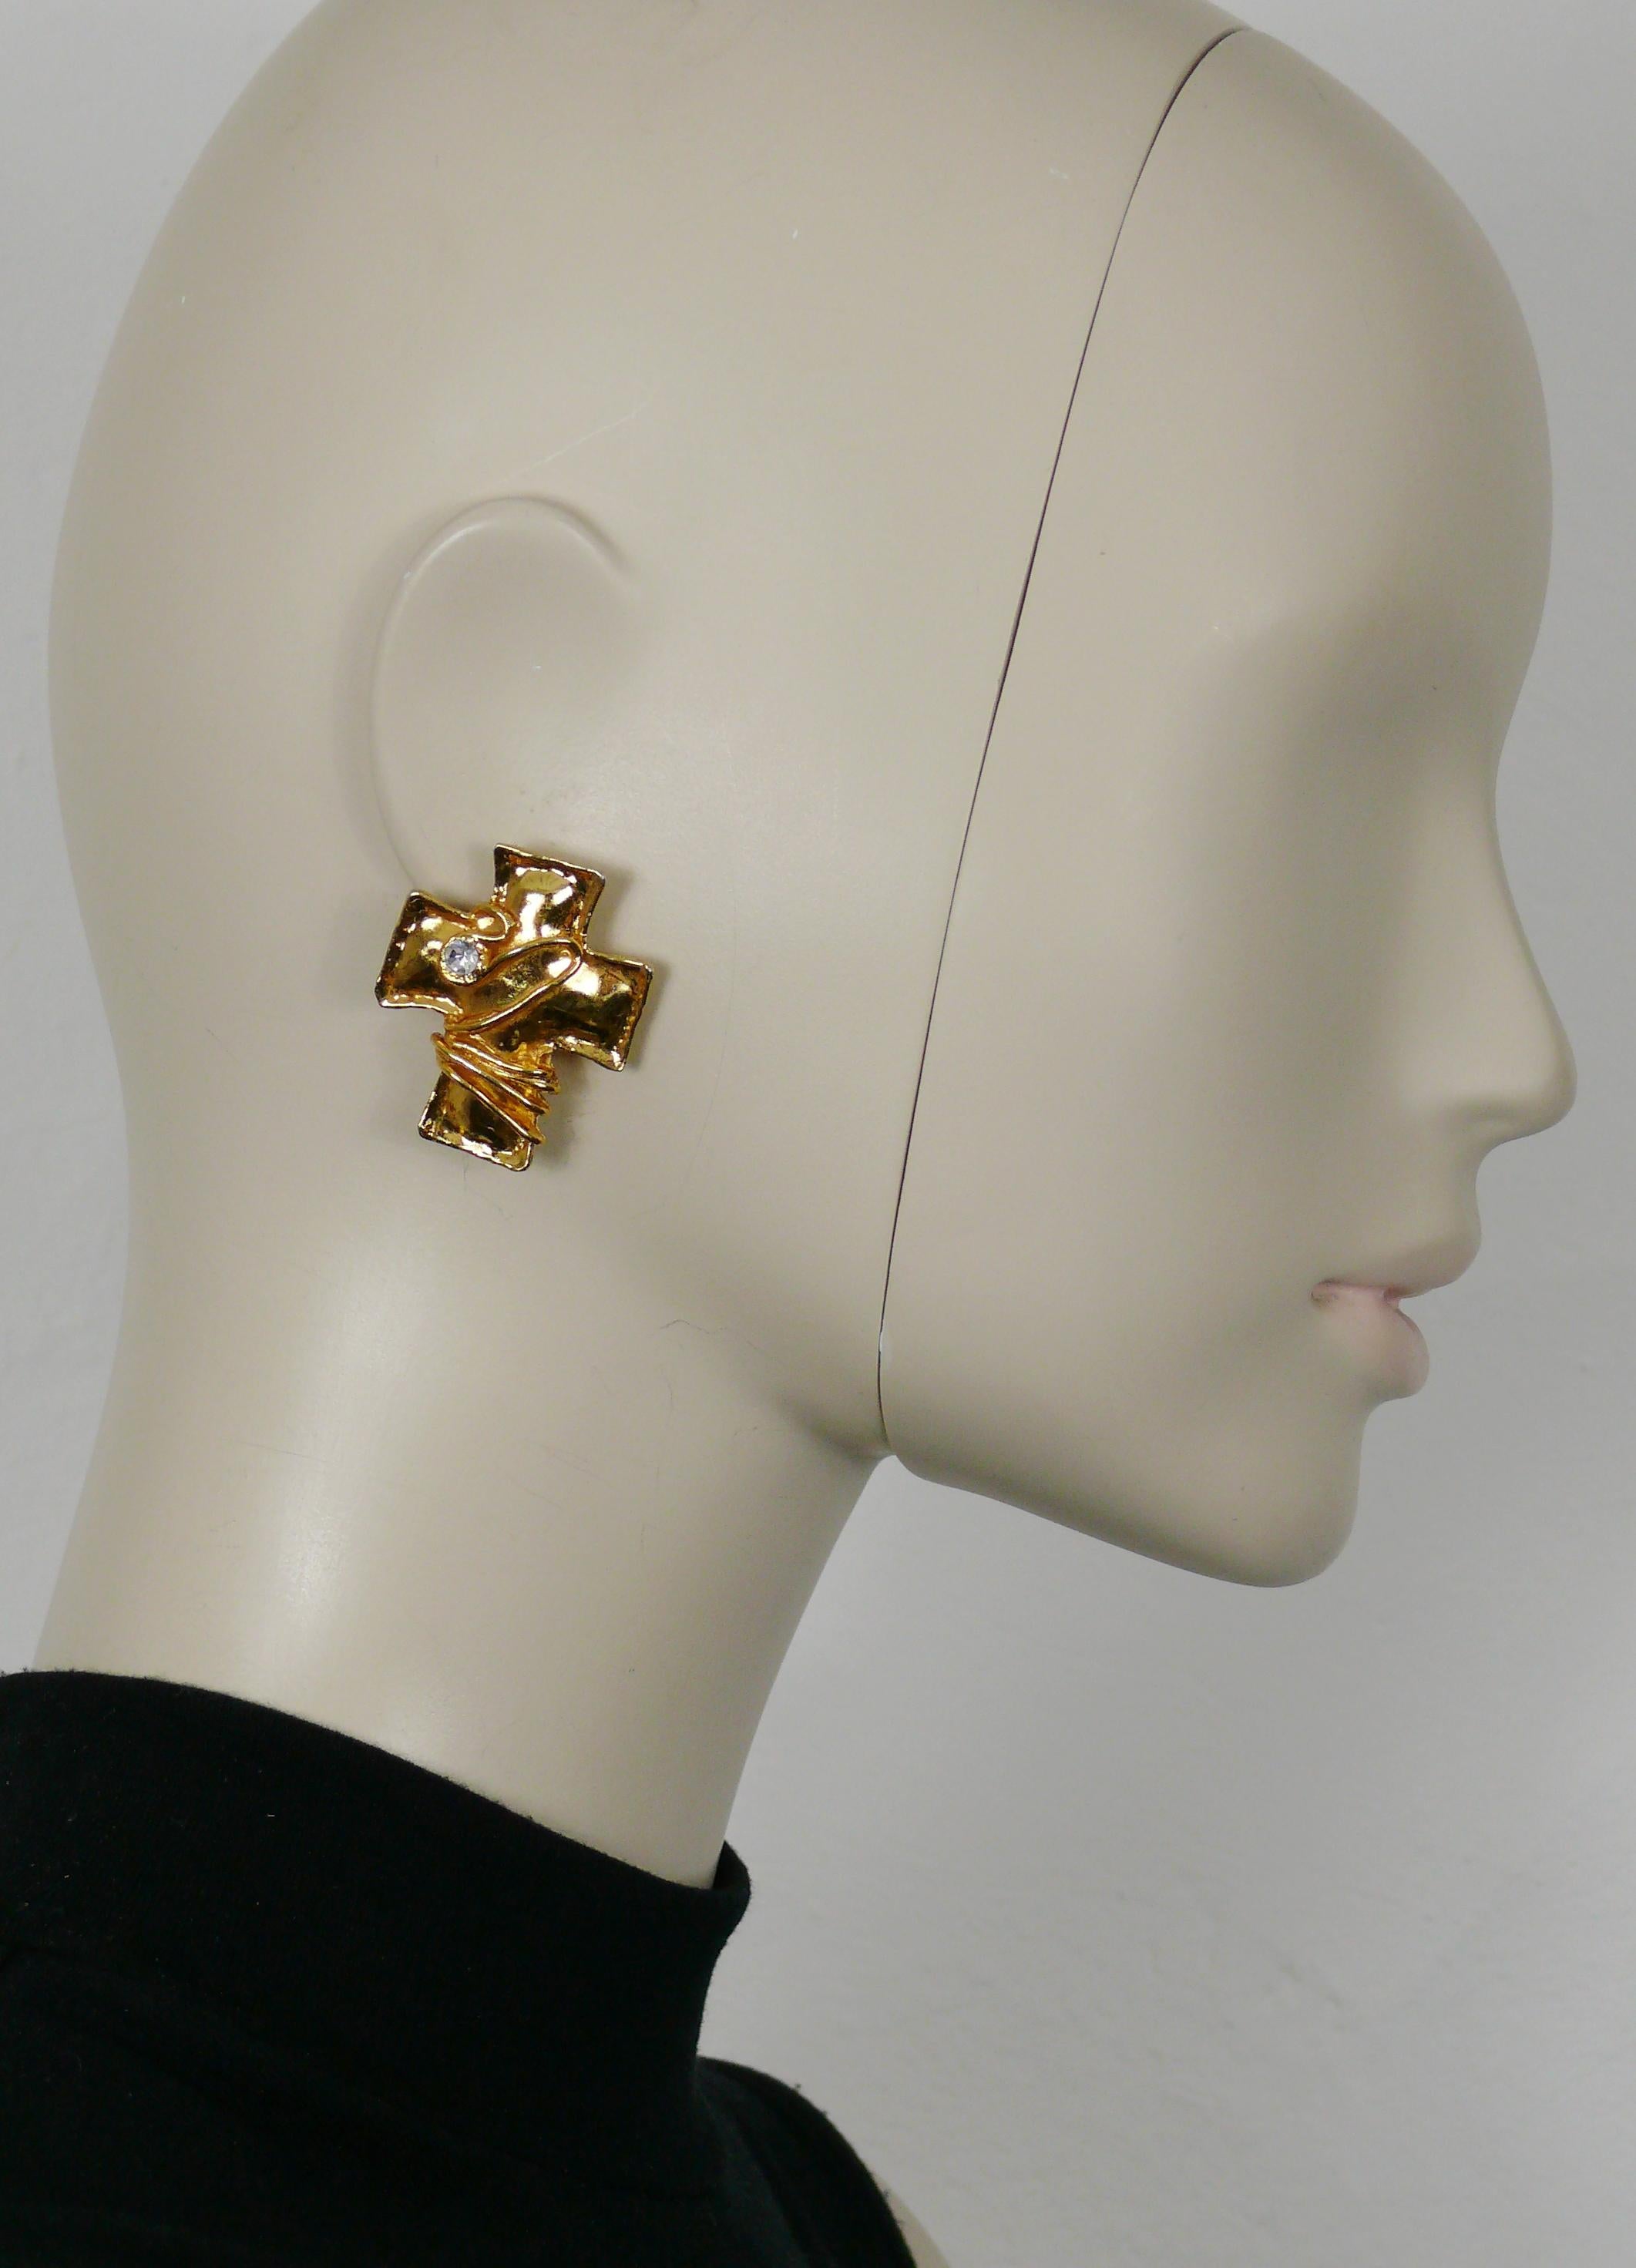 CHRISTIAN LACROIX vintage gold tone cross clip-on earrings with wire detail and embellished with a clear crystal.

Marked CHRISTIAN LACROIX CL Made in France.

Indicative measurements : height approx. 3.9 cm (1.54 inches) / width approx. 3.1 cm